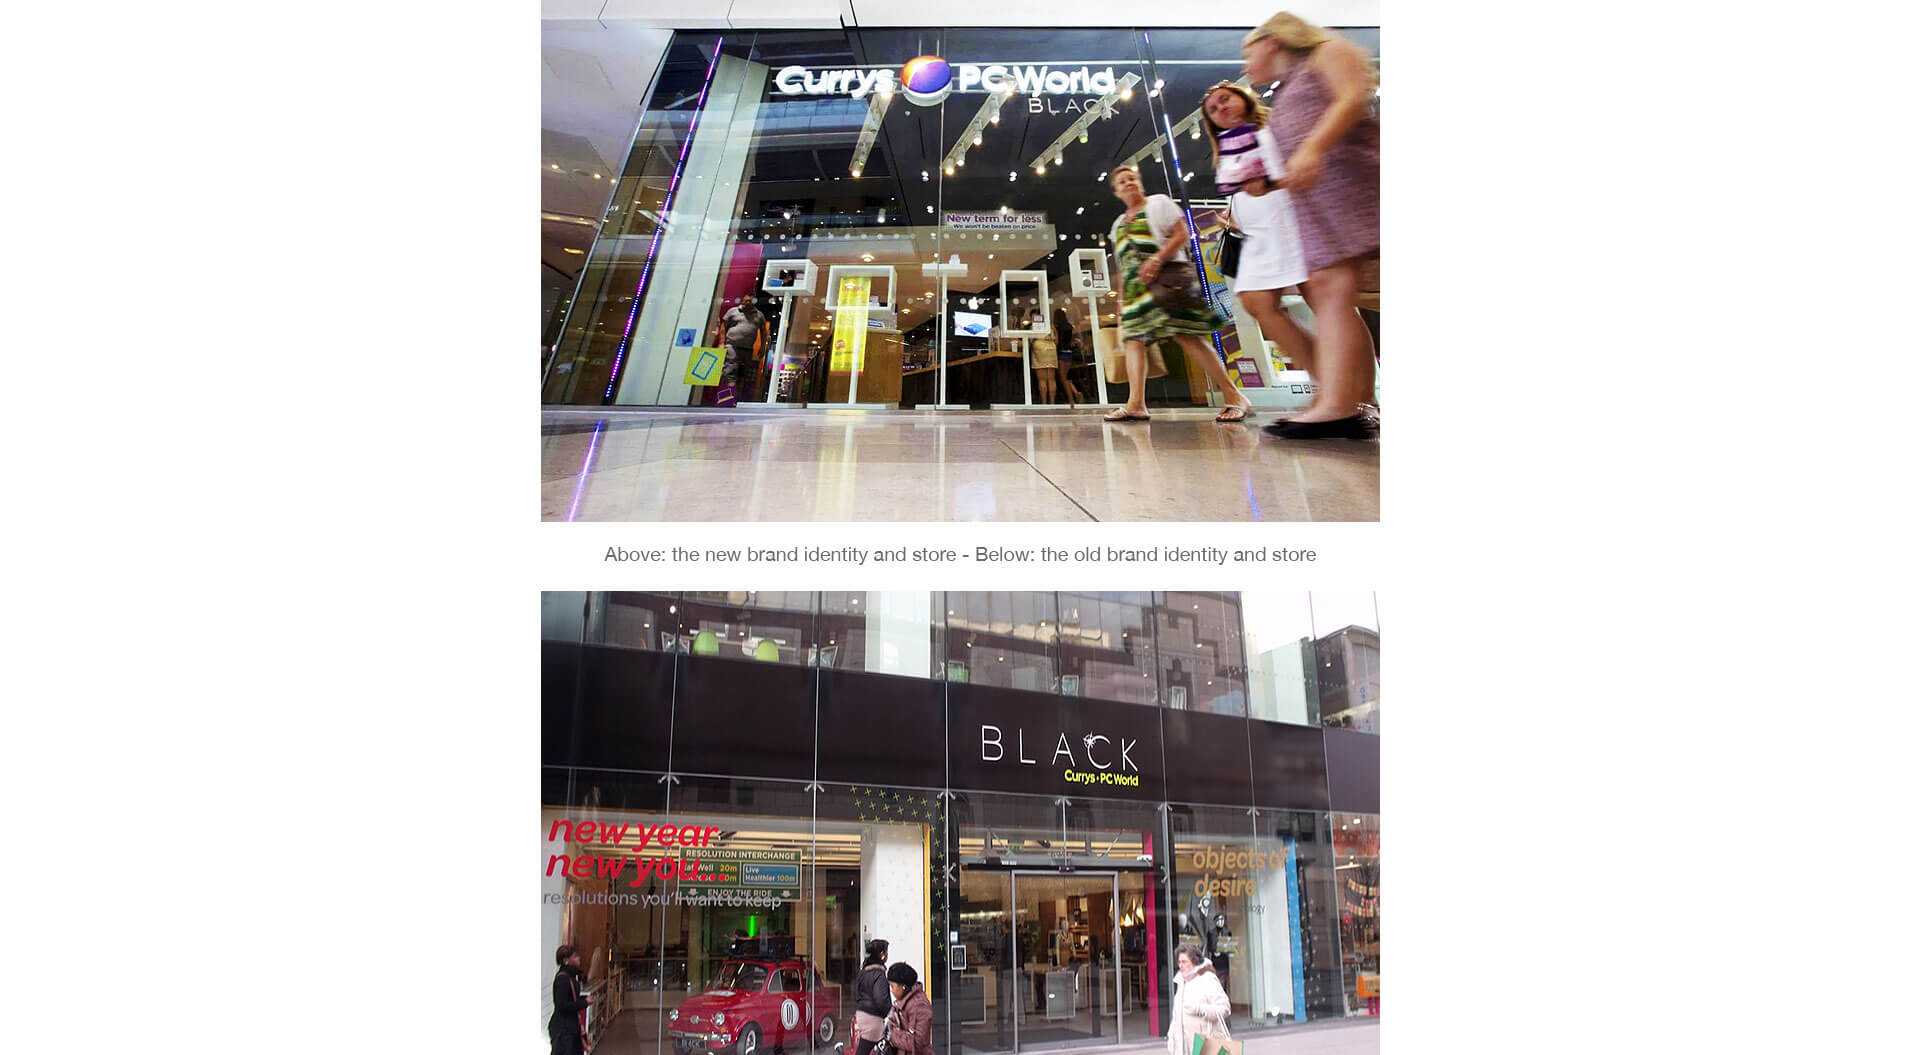 Black Currys PC World innovative corporate brand identity store front and window before and after rebrand